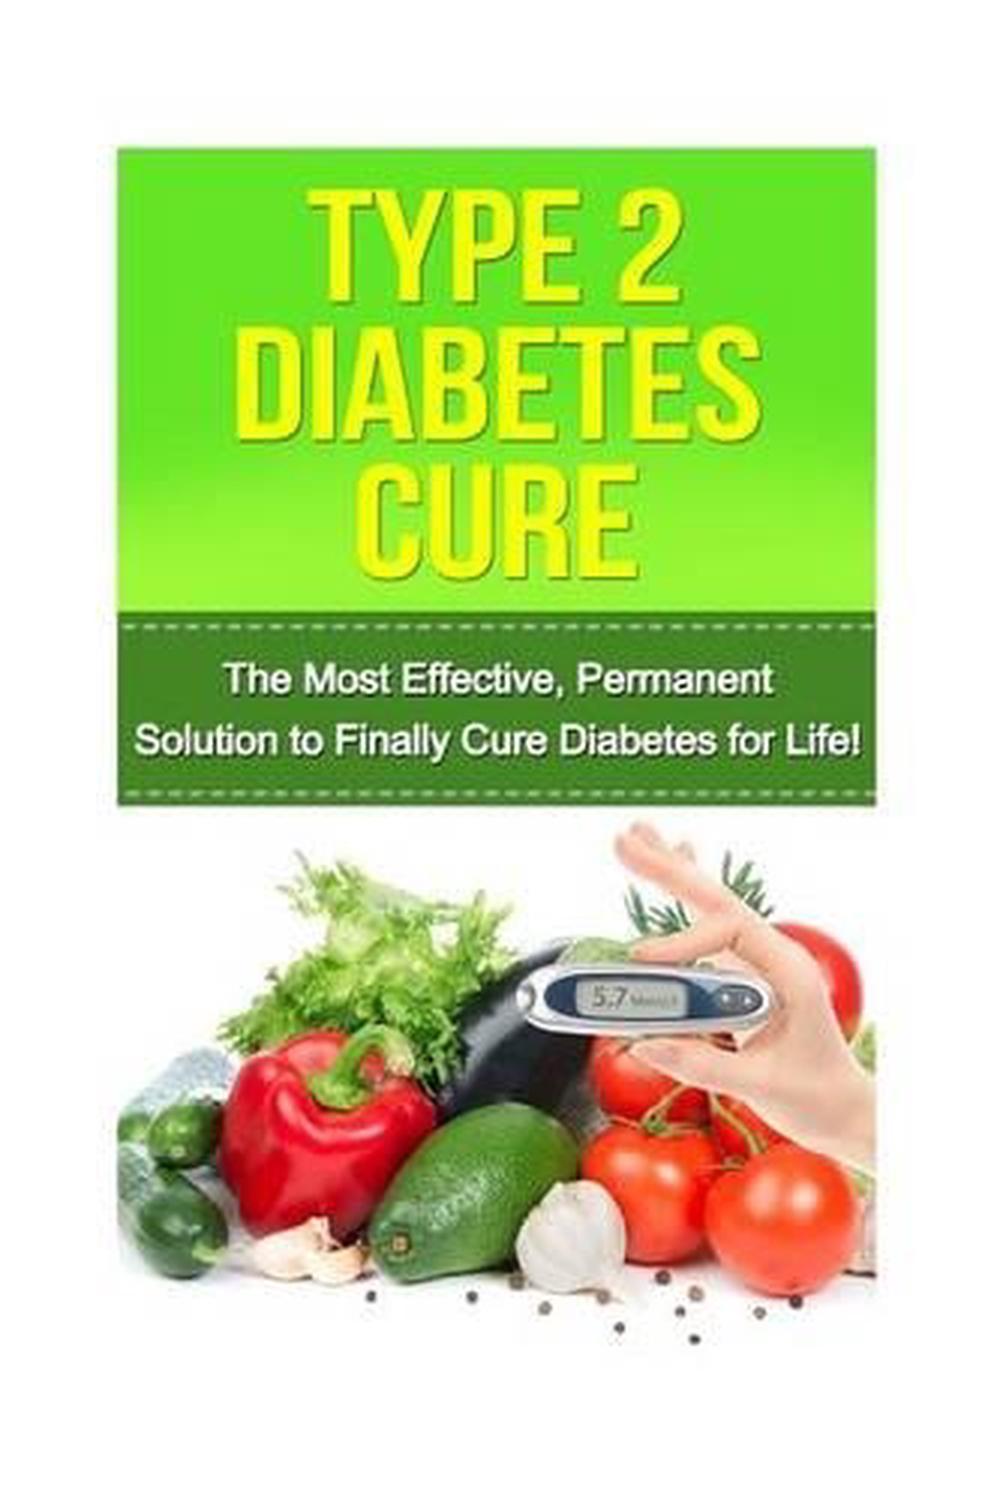 8 Easy Facts About New Diabetes Treatments with DrJohn Buse Shown